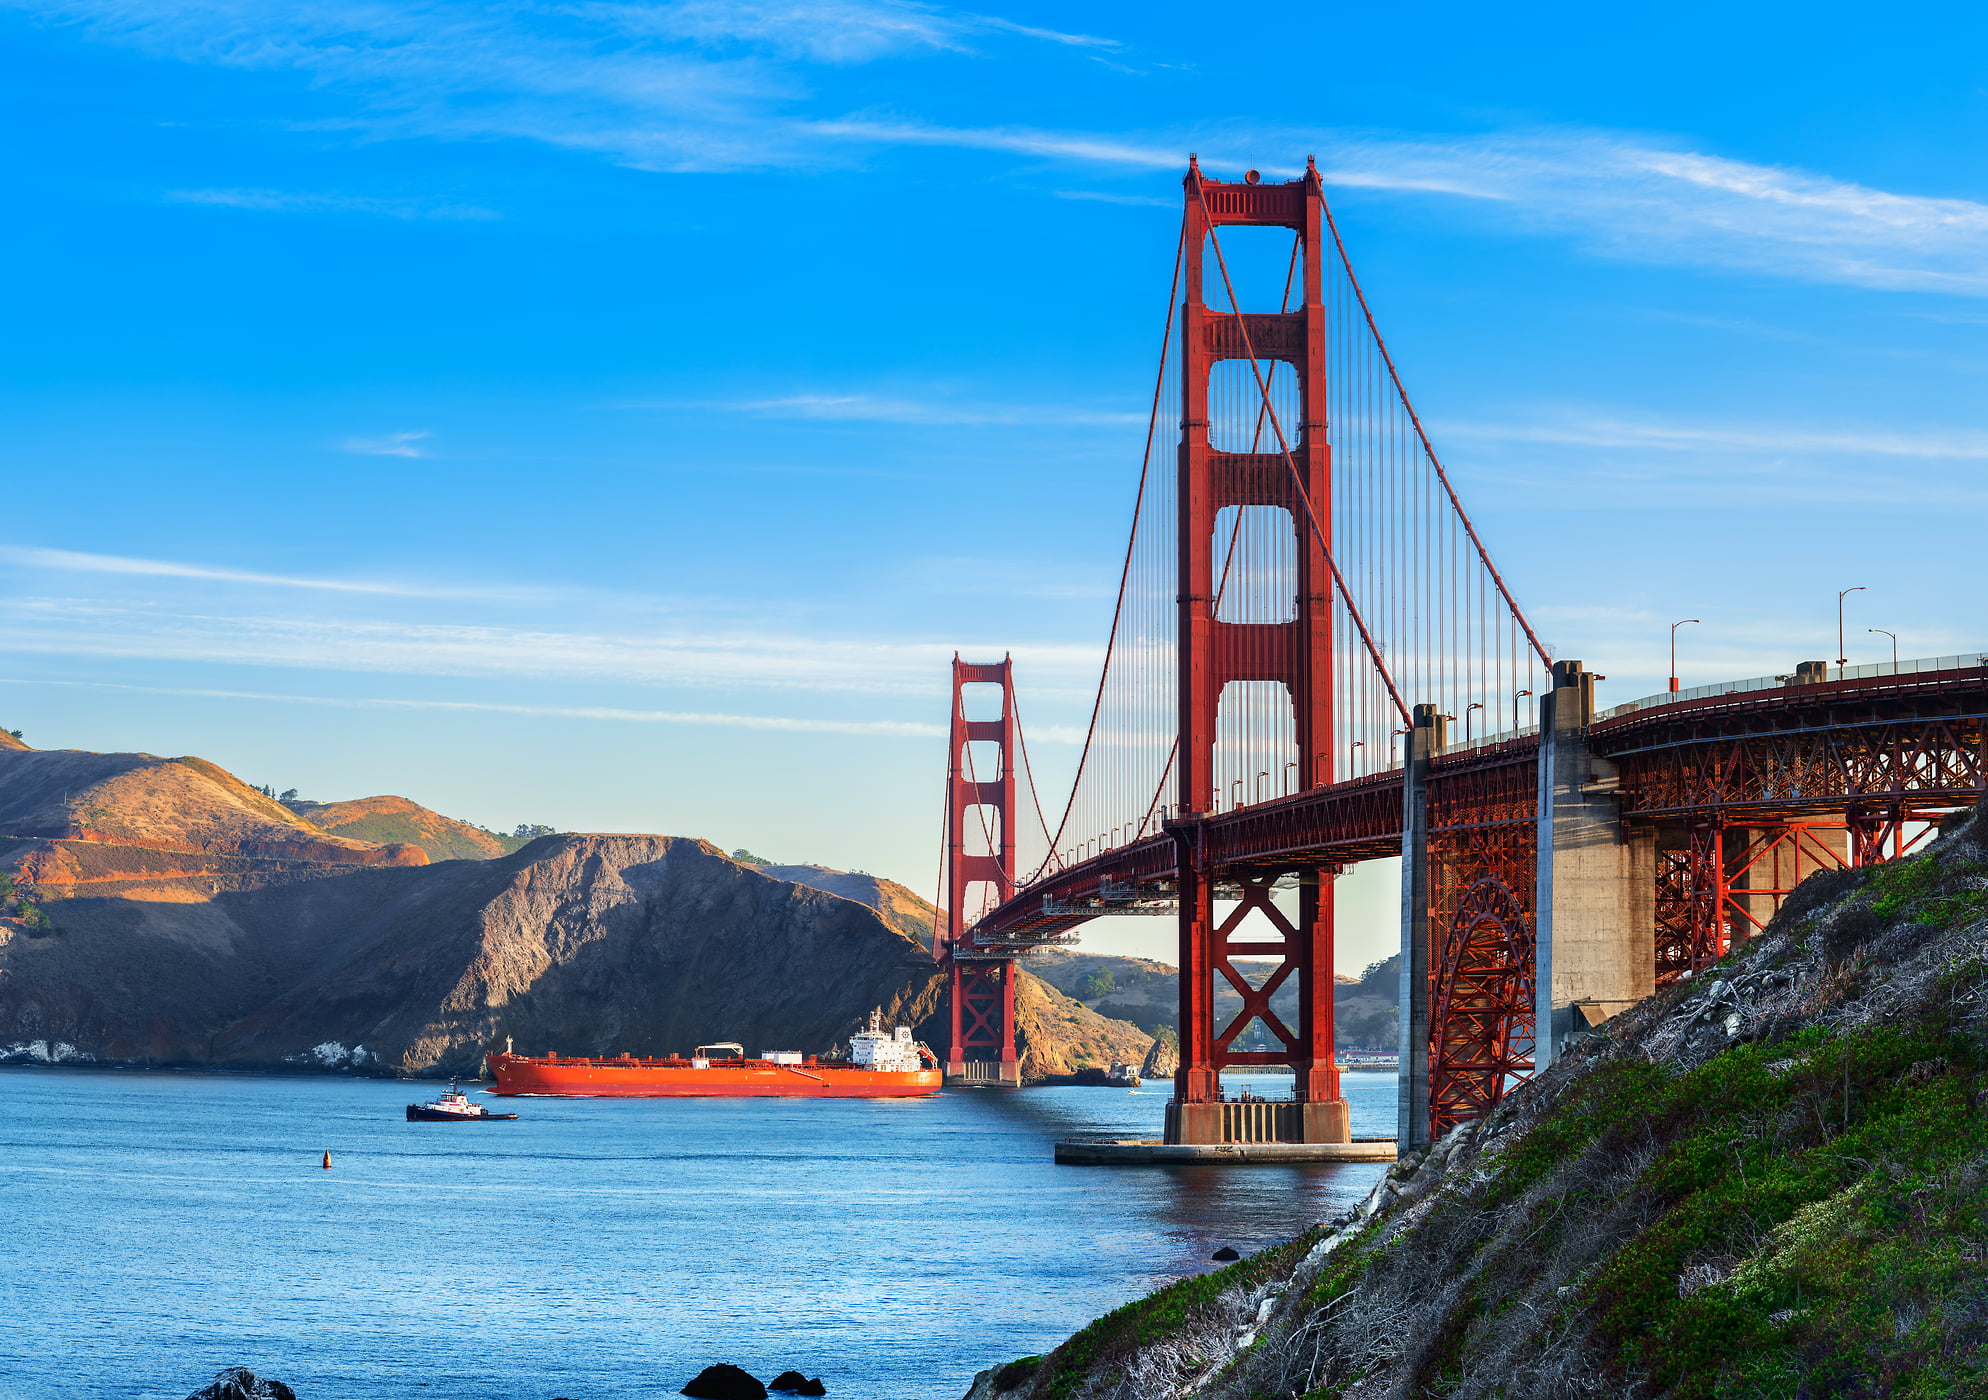 588 megapixels! A very high resolution, large-format VAST photo print of the Golden Gate Bridge with a blue sky in the background and the San Francisco Bay in the foreground; photograph created by Jim Tarpo in Marshall's Beach, San Francisco, California